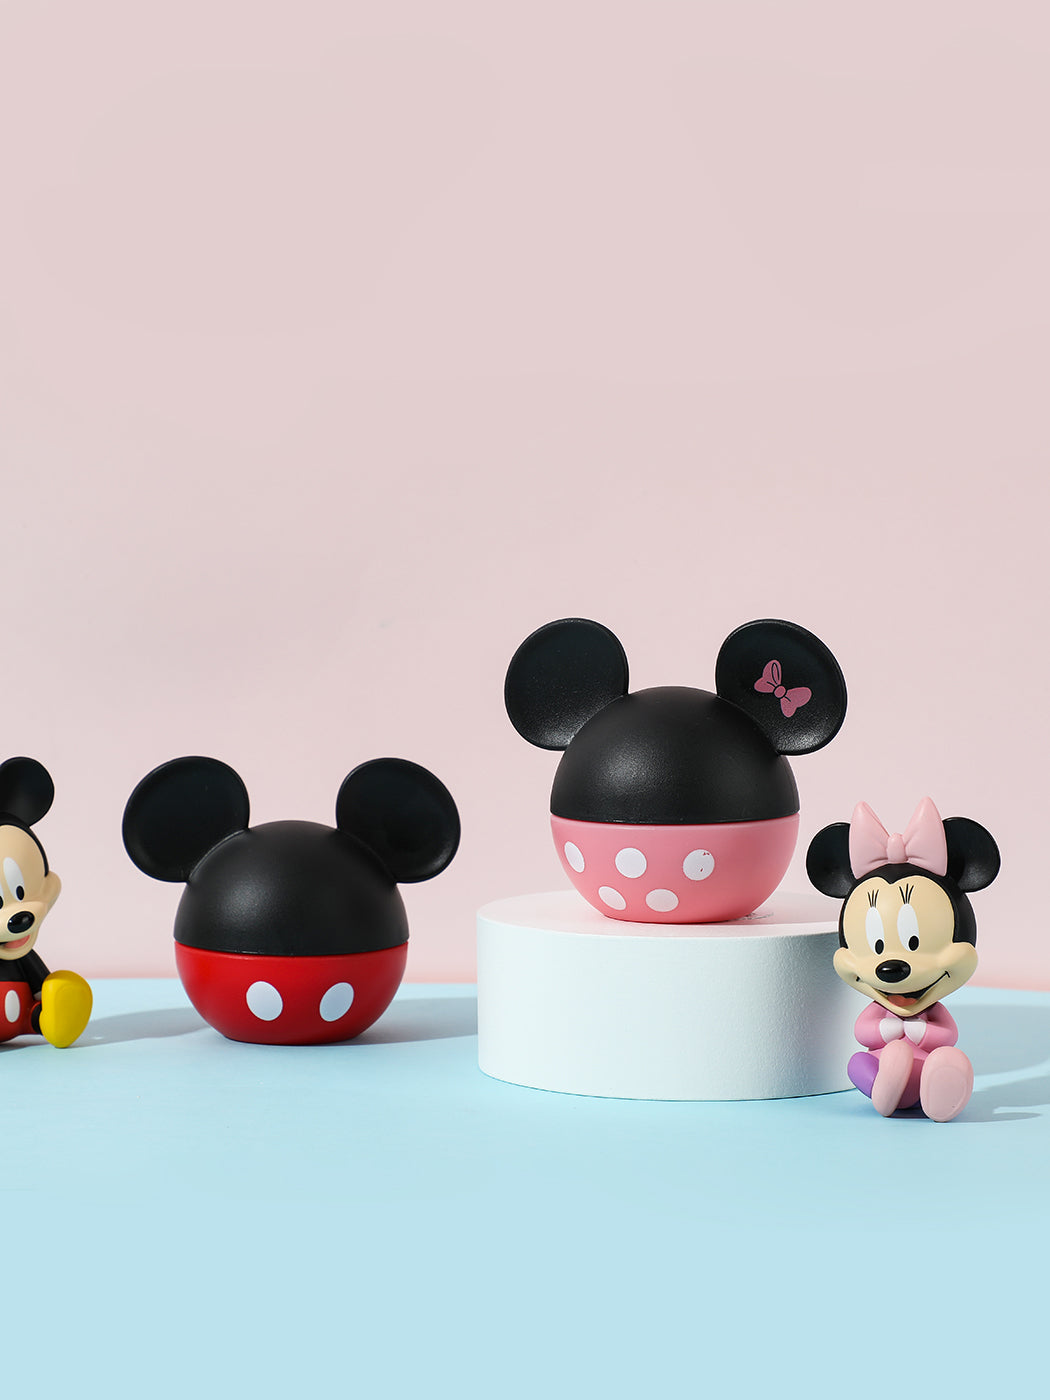 MINISO MICKEY MOUSE COLLECTION BLACK GILDING SCENTED CREAM (PINK LICHEE) 2008448010108 DEODORANT/DESICCANT